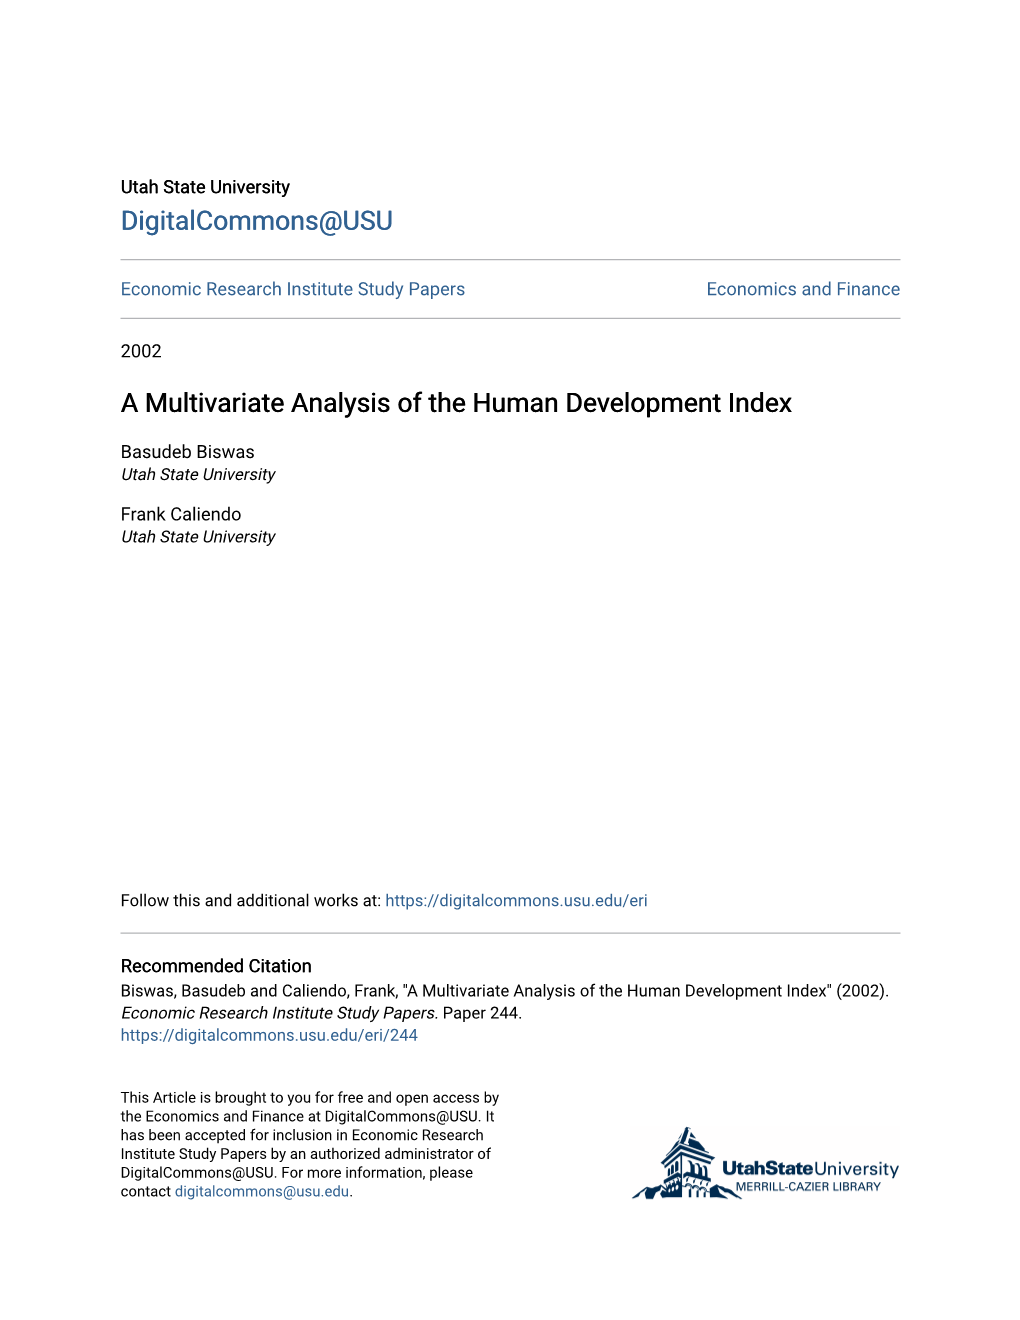 A Multivariate Analysis of the Human Development Index